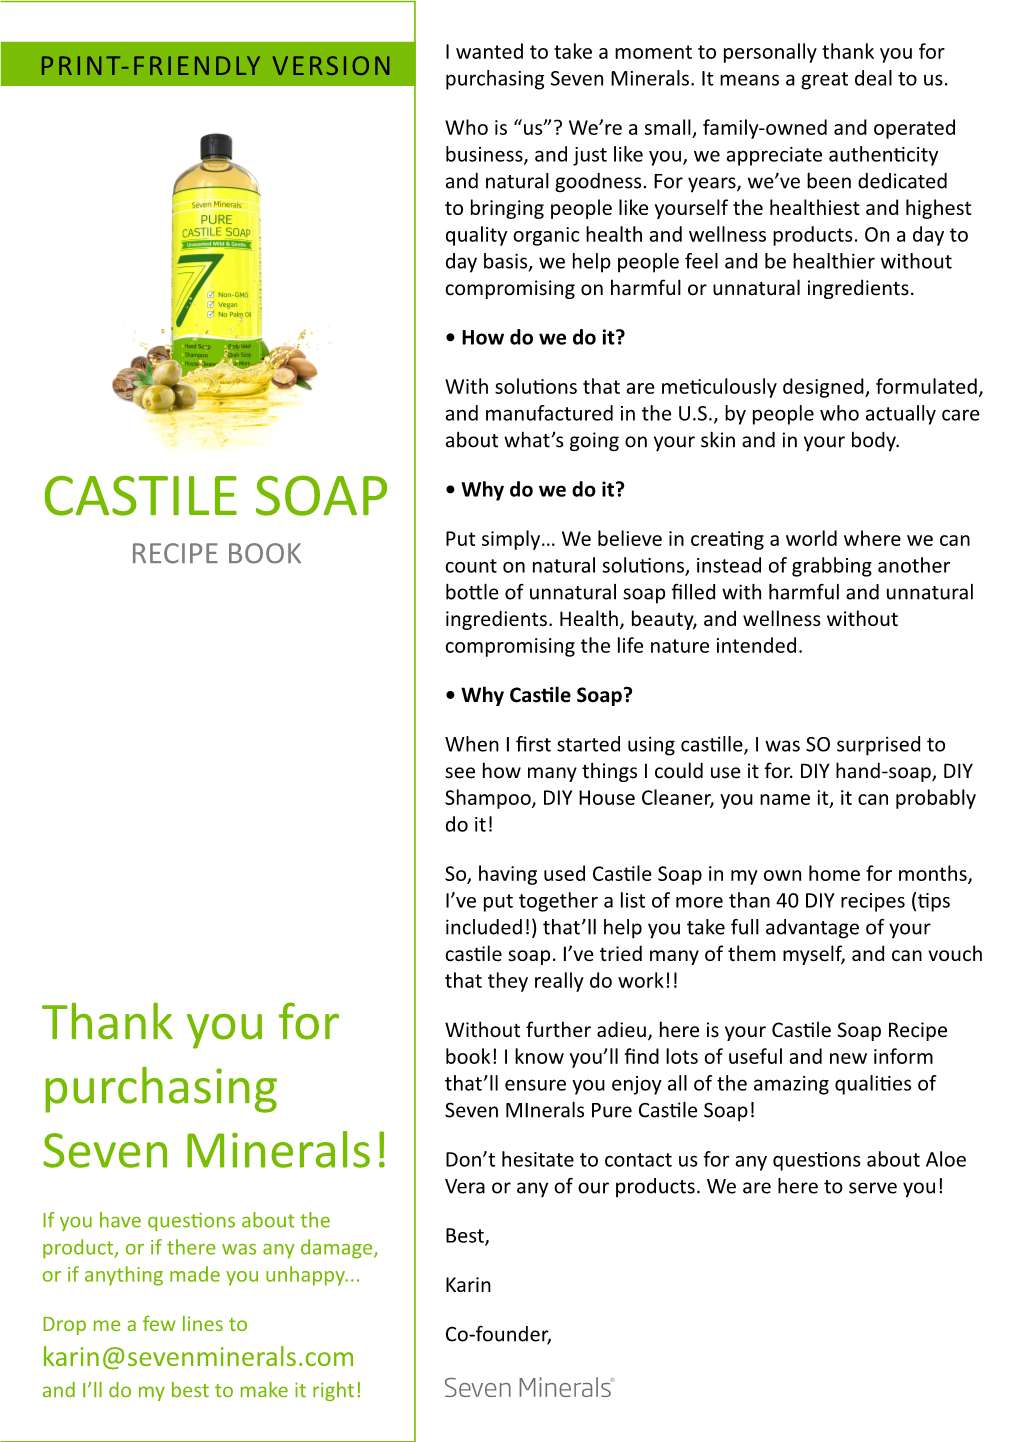 Why Castile Soap?